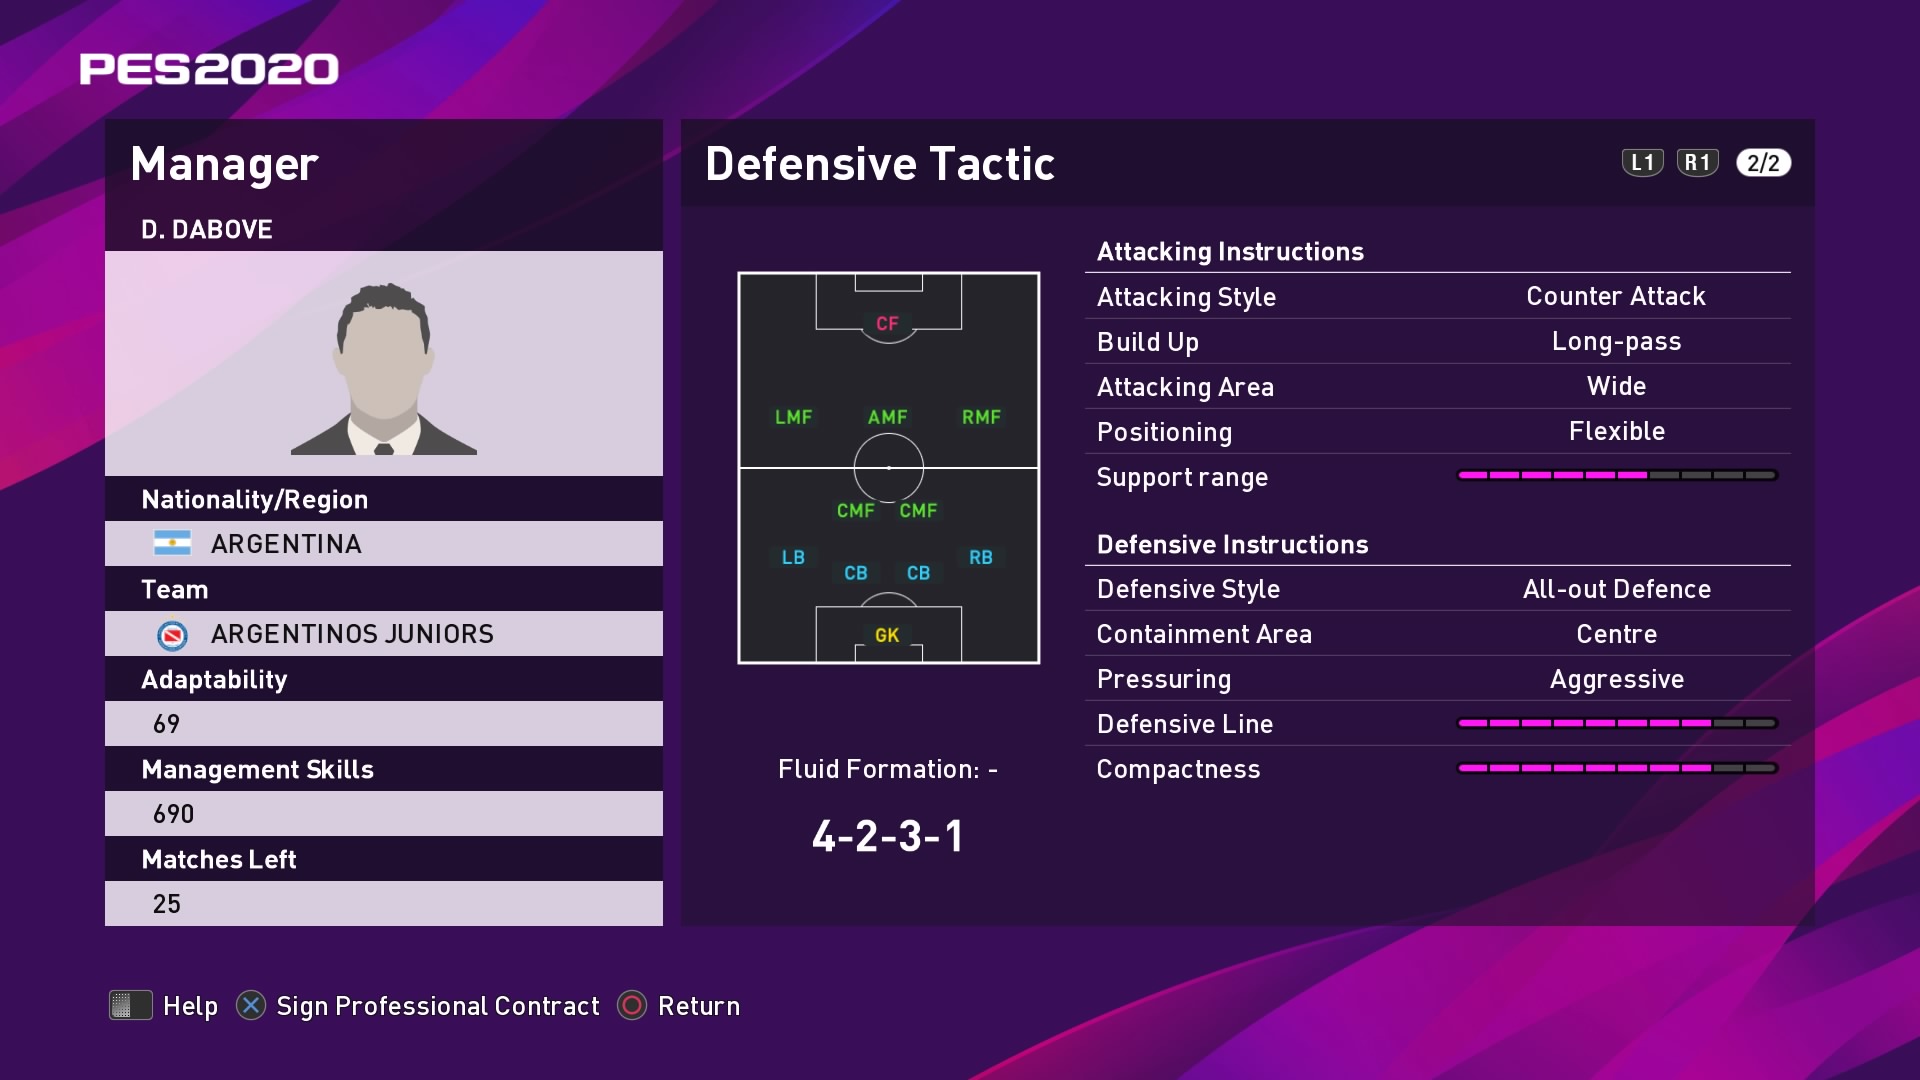 D. Dabove (Diego Dabove) Defensive Tactic in PES 2020 myClub